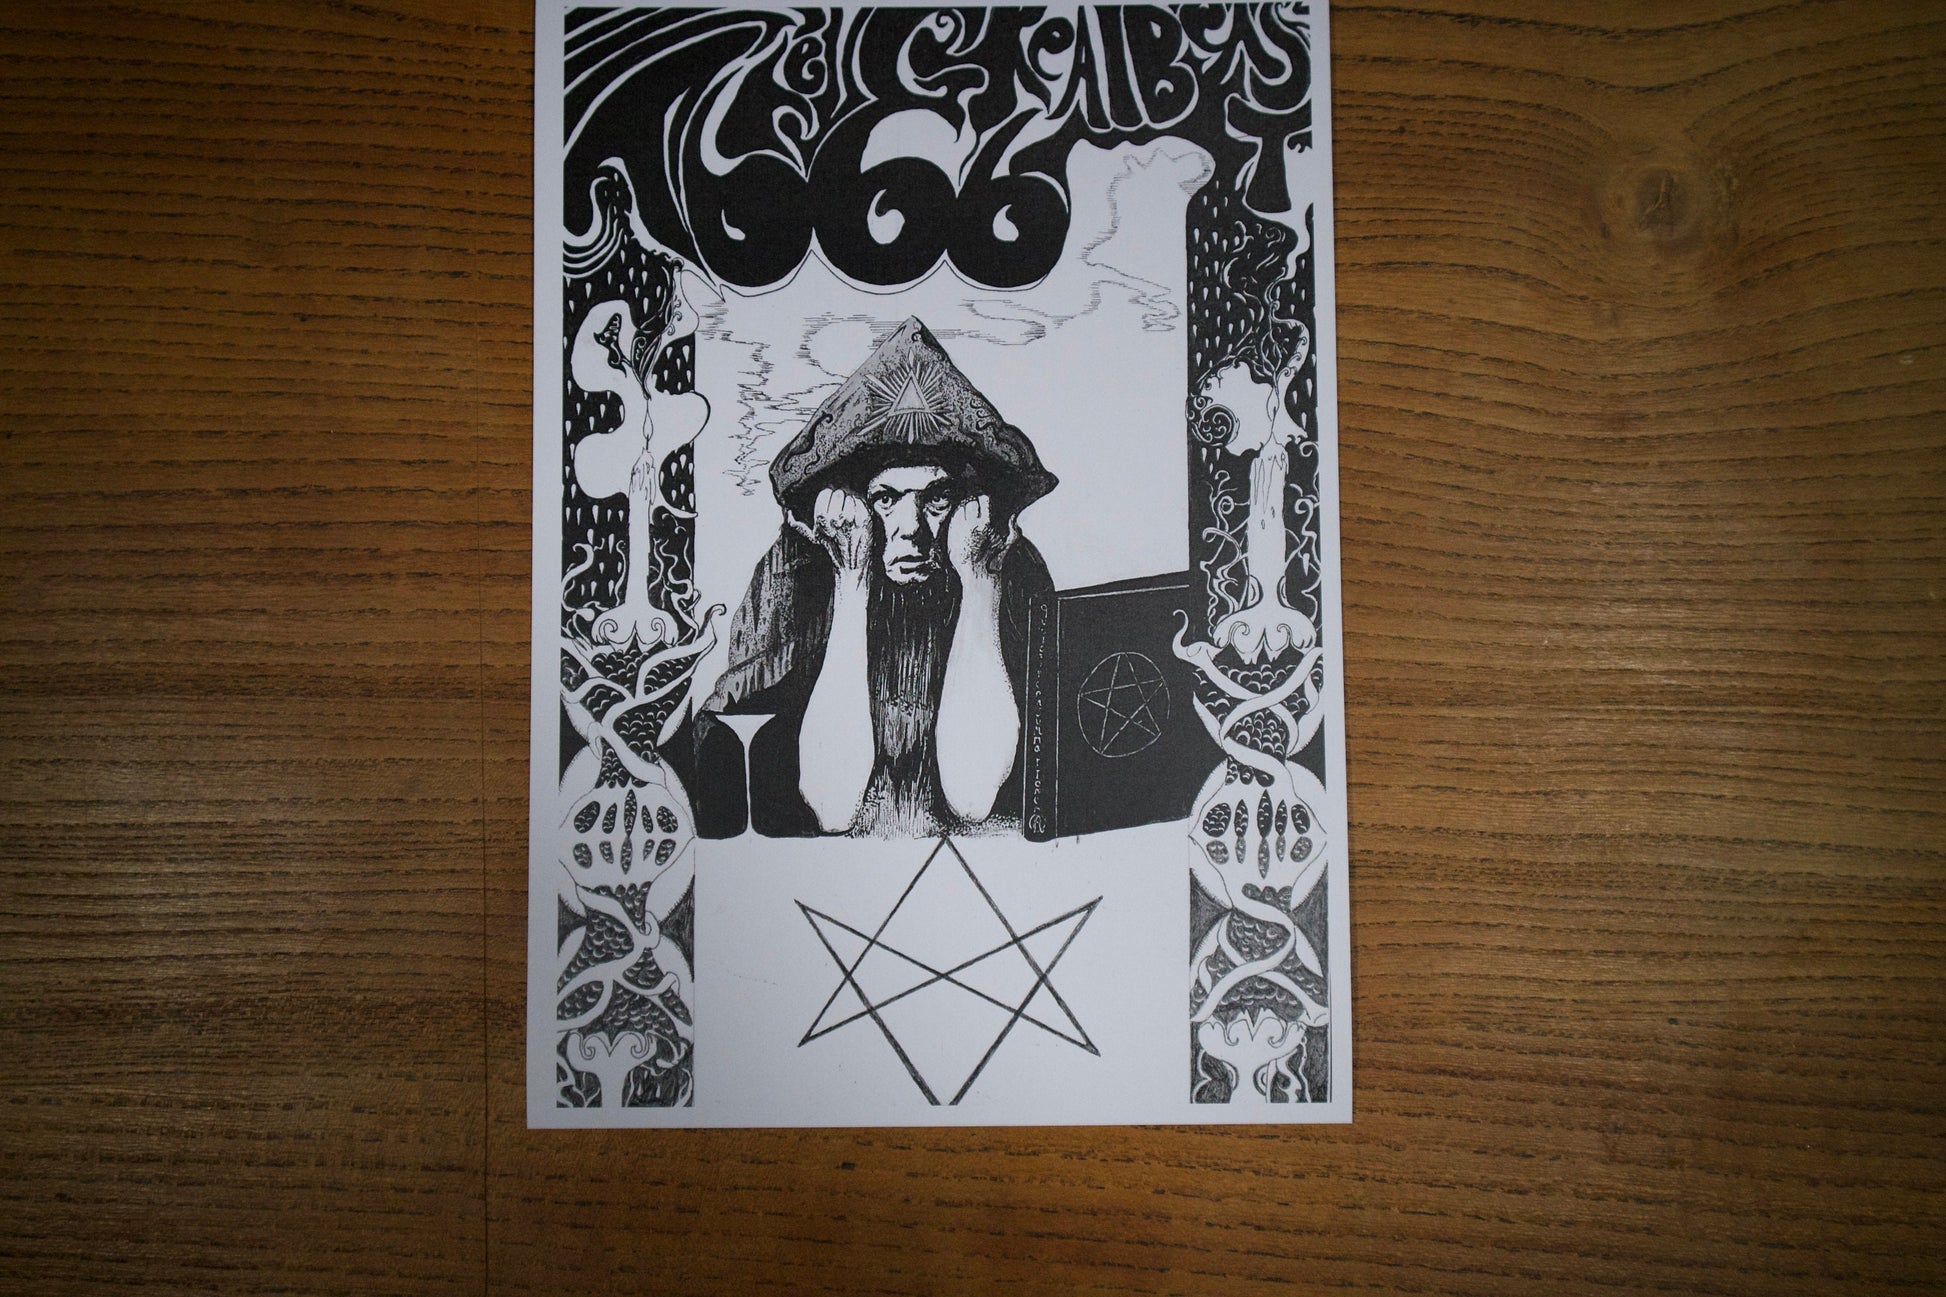 A print on a table of A black and white pen and ink portrait of Aleister Crowley in a psychedelic art nouveau style, the text above reads The Great Beast 666